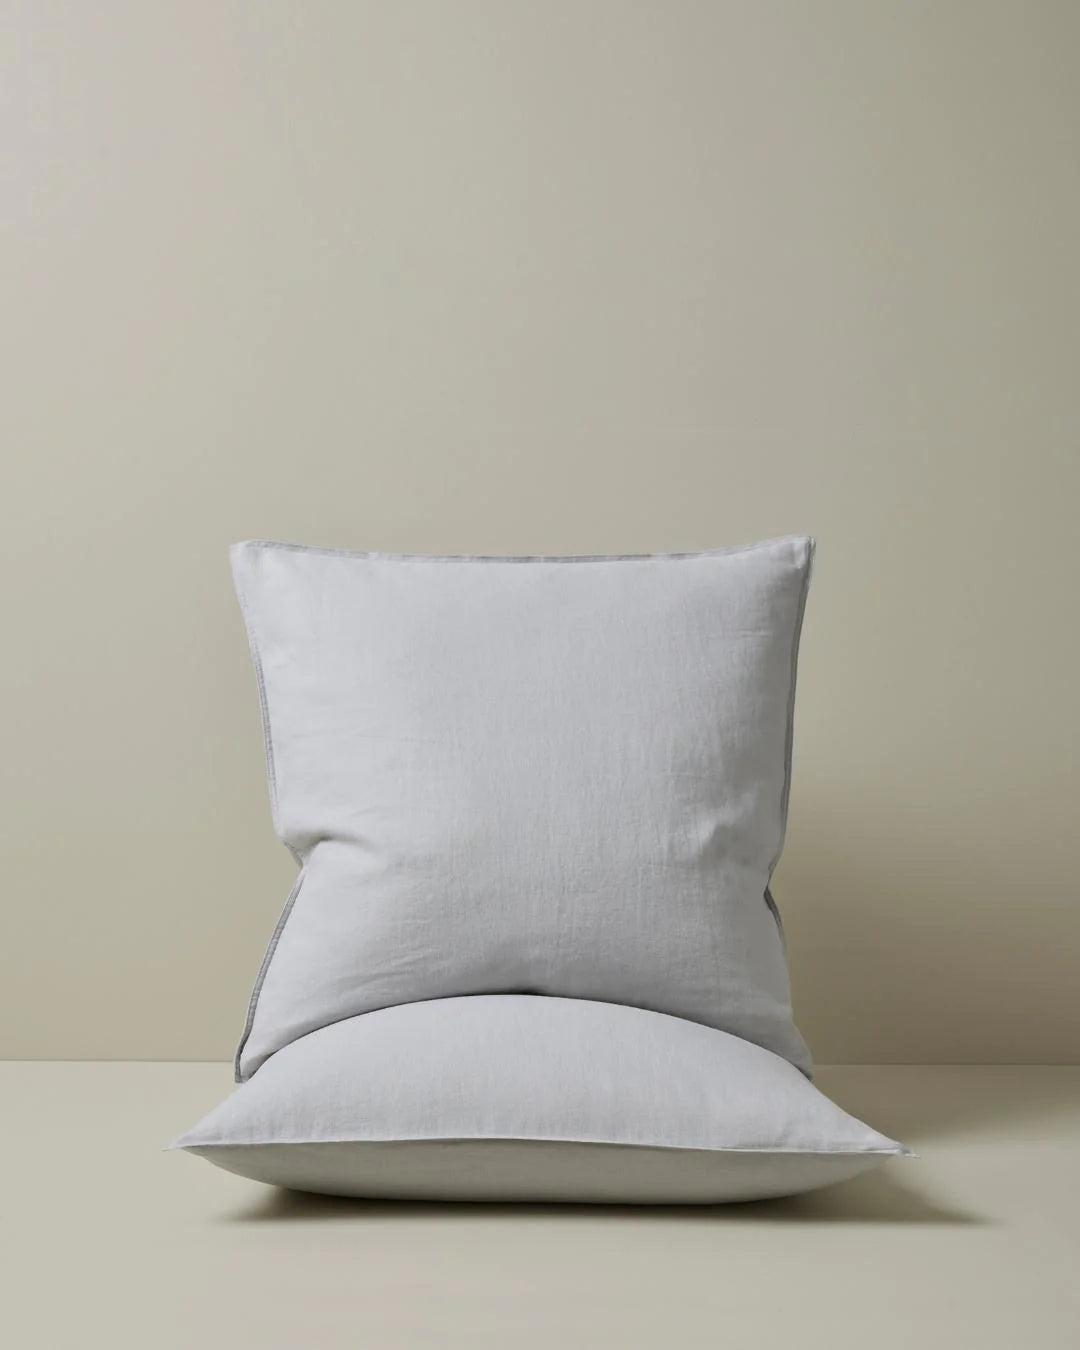 Crafted from the highest quality French Flax Linen, each product from the Ravello range is prewashed and aero finished for a unique and luxuriously soft, relaxed feel, making it a dream to rest and relax on.  The Silver colourway is a cool, muted grey that will sit wonderfully in a neutral bedroom and pair effortlessly with white and onyx.